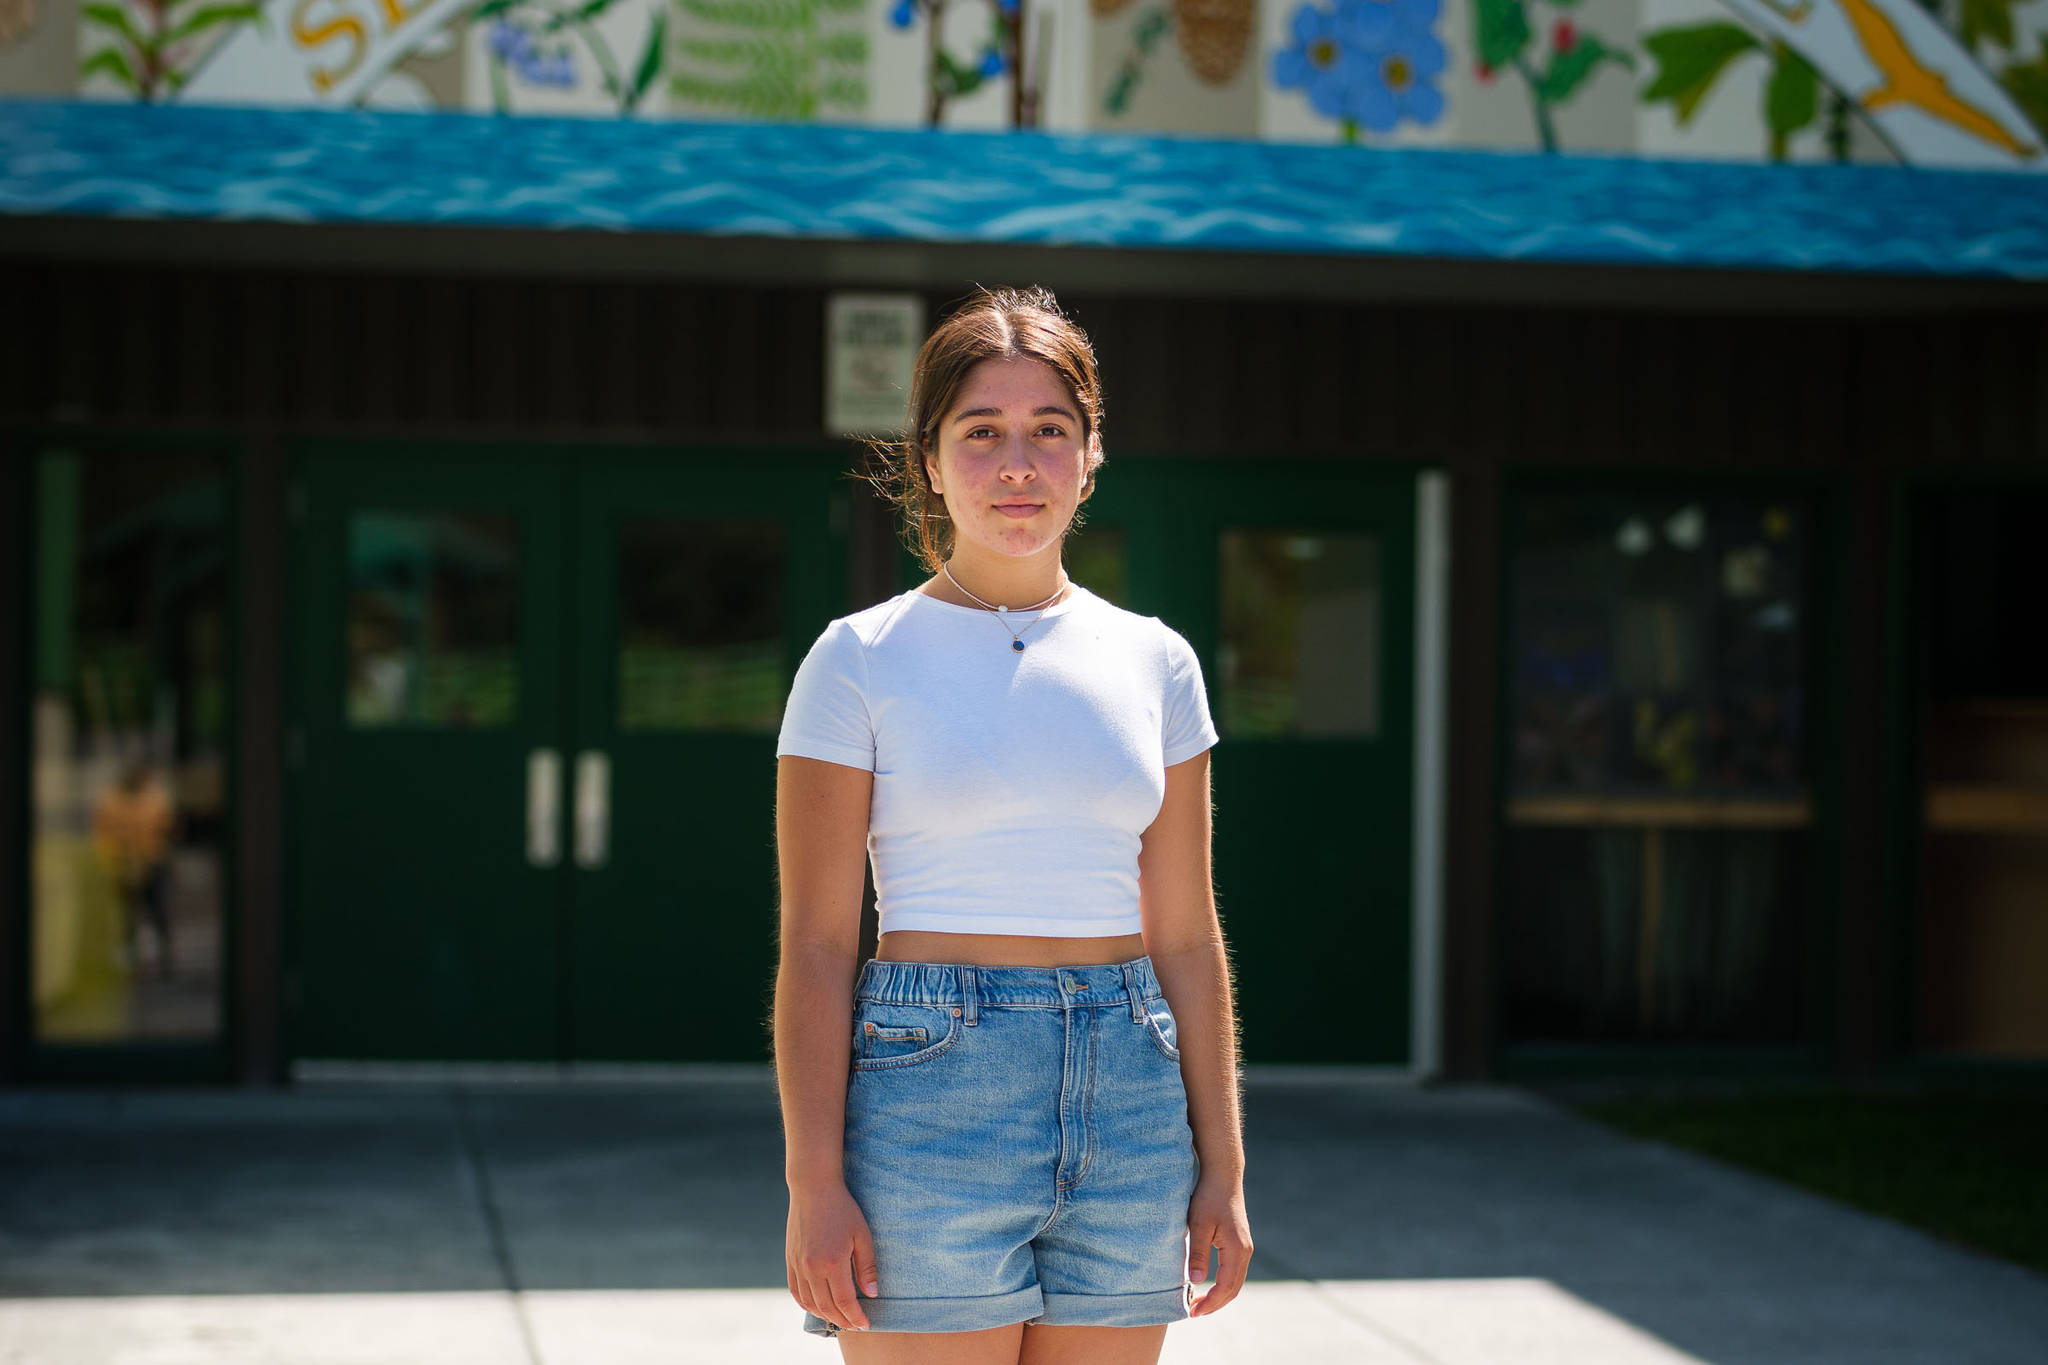 Selma Casagranda, a recent Seward High School graduate and lifelong resident of Seward, stands in front of her former school on May 25, 2021. (Young Kim for The Hechinger Report)